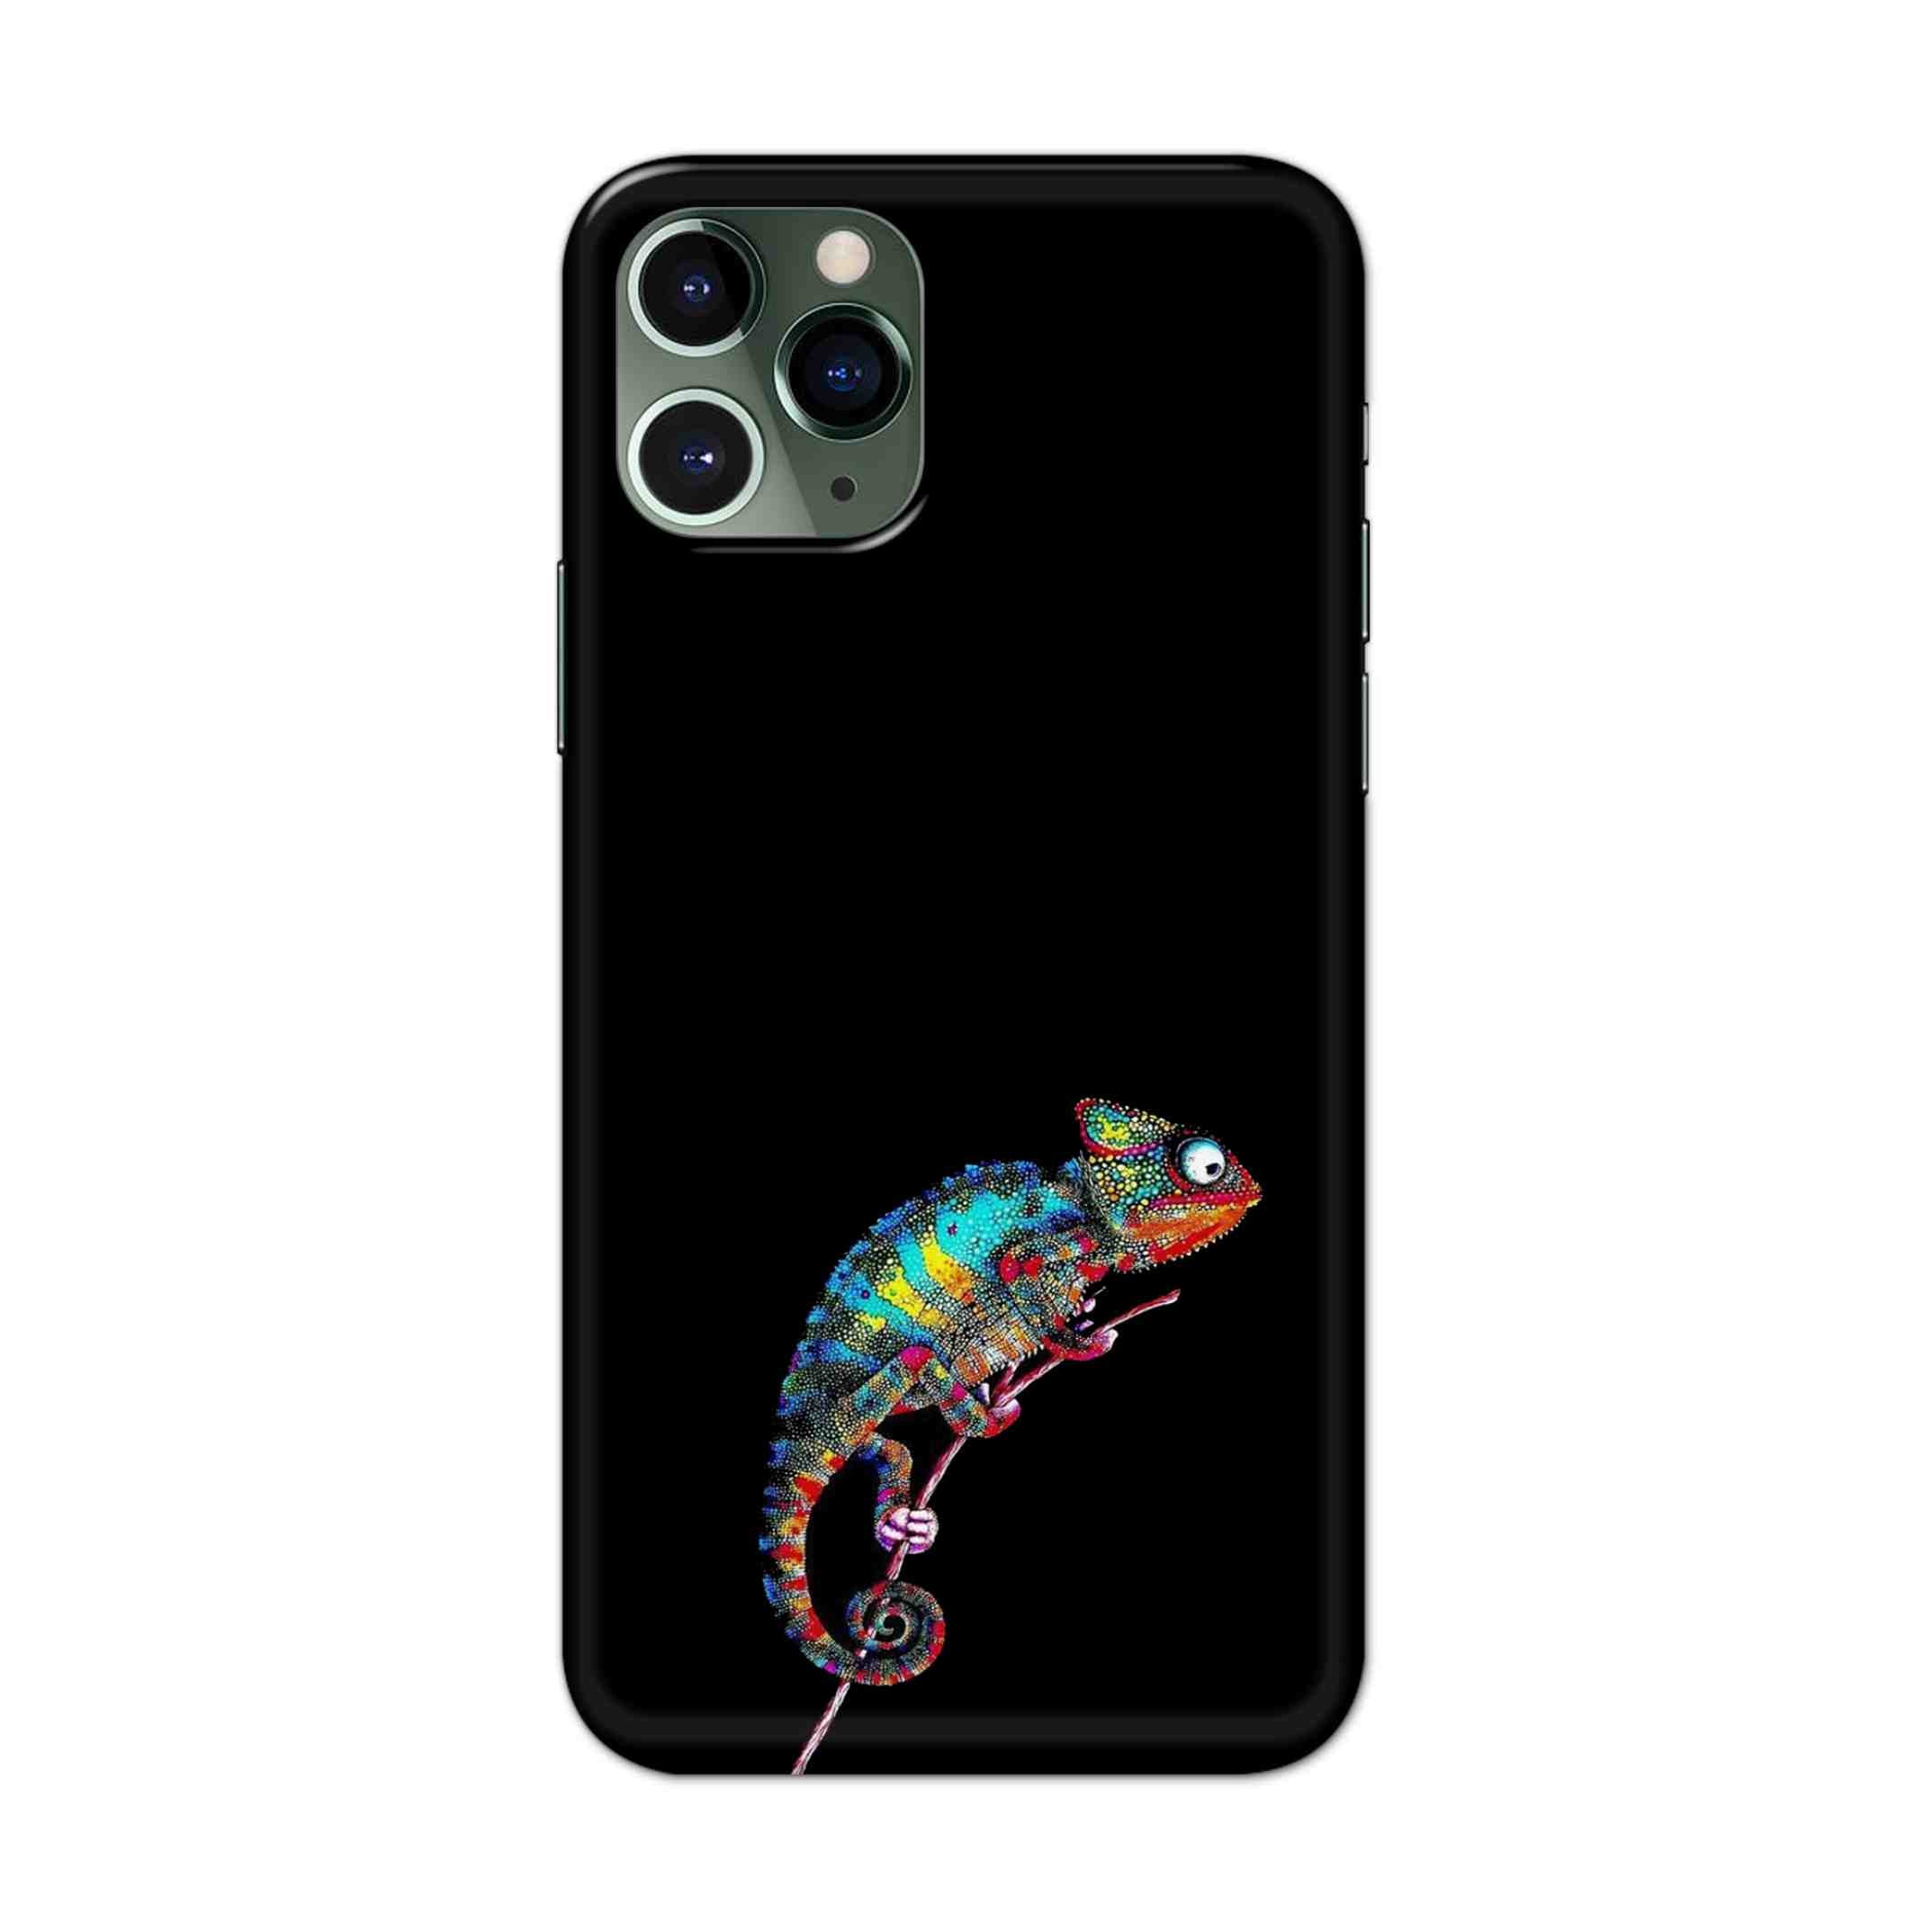 Buy Chamaeleon Hard Back Mobile Phone Case/Cover For iPhone 11 Pro Online